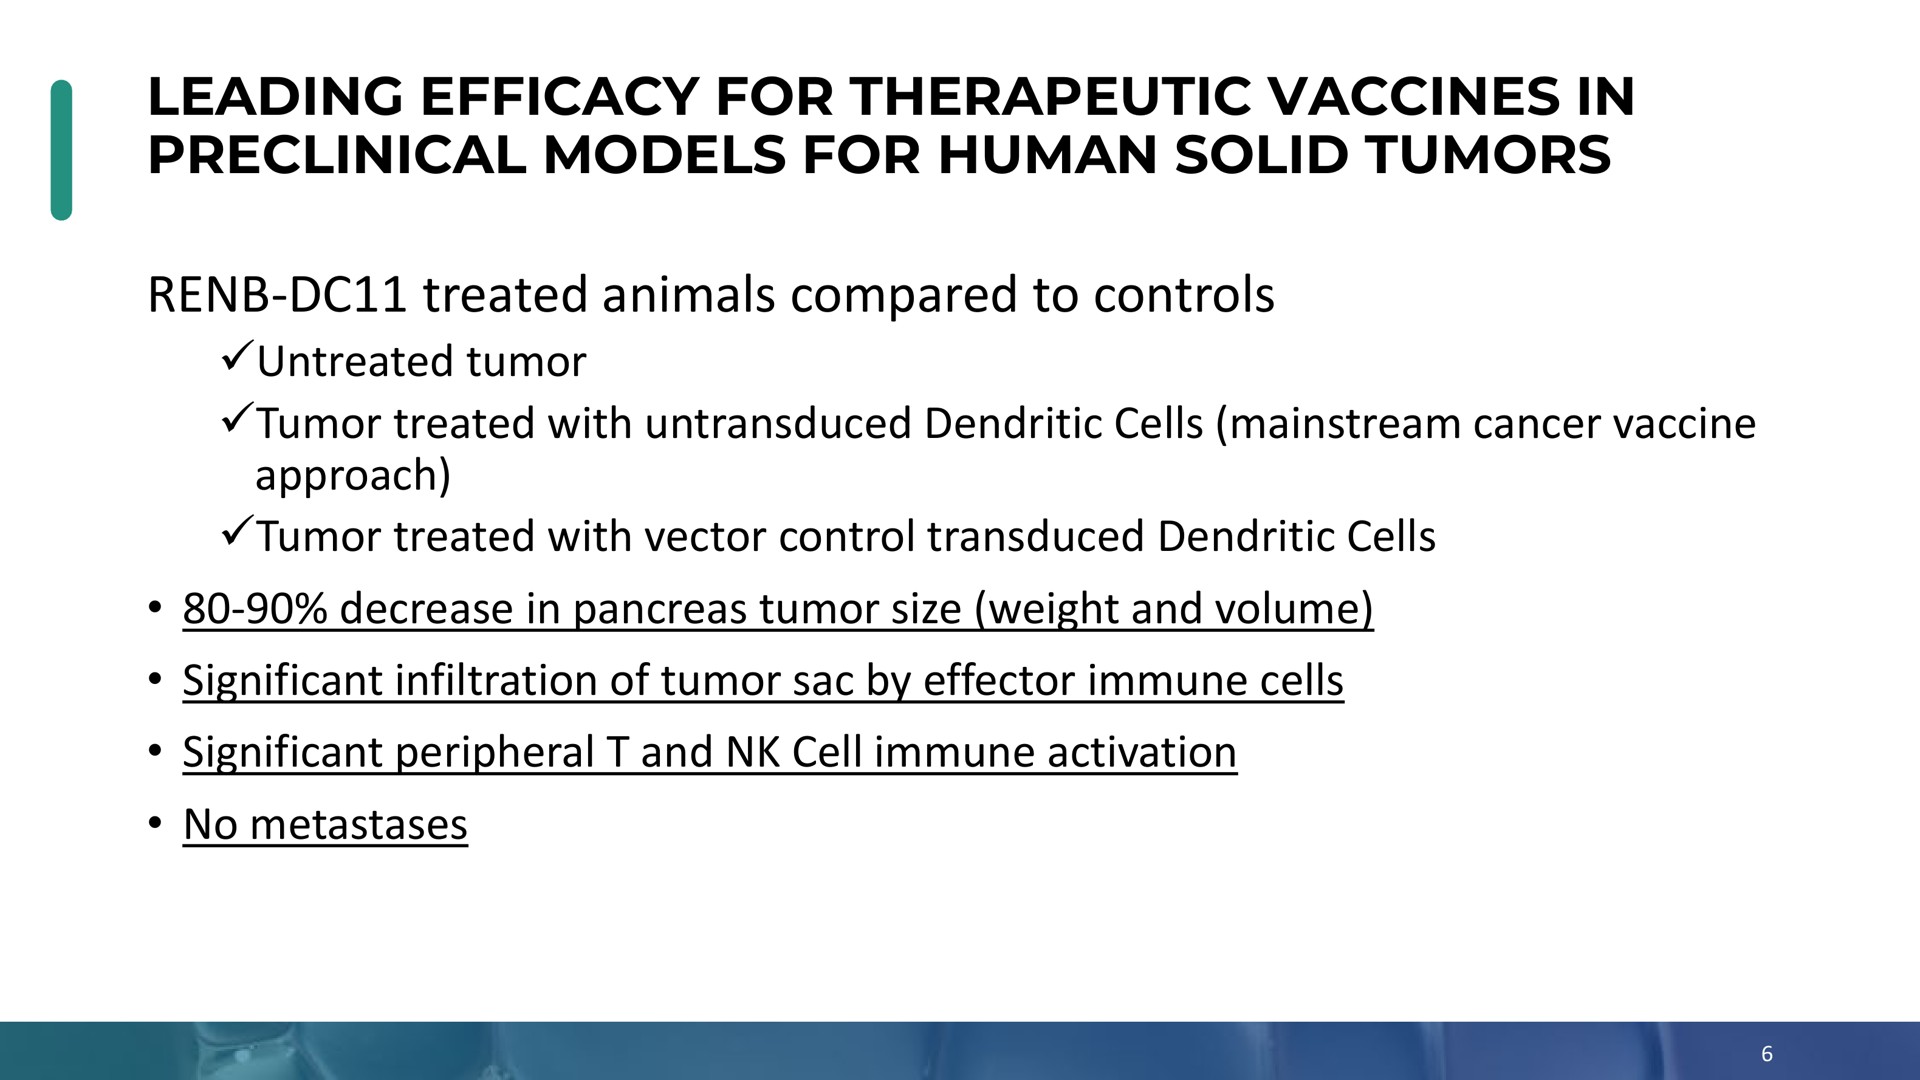 leading efficacy for therapeutic vaccines in preclinical models for human solid tumors treated animals compared to controls | Enochian Biosciences